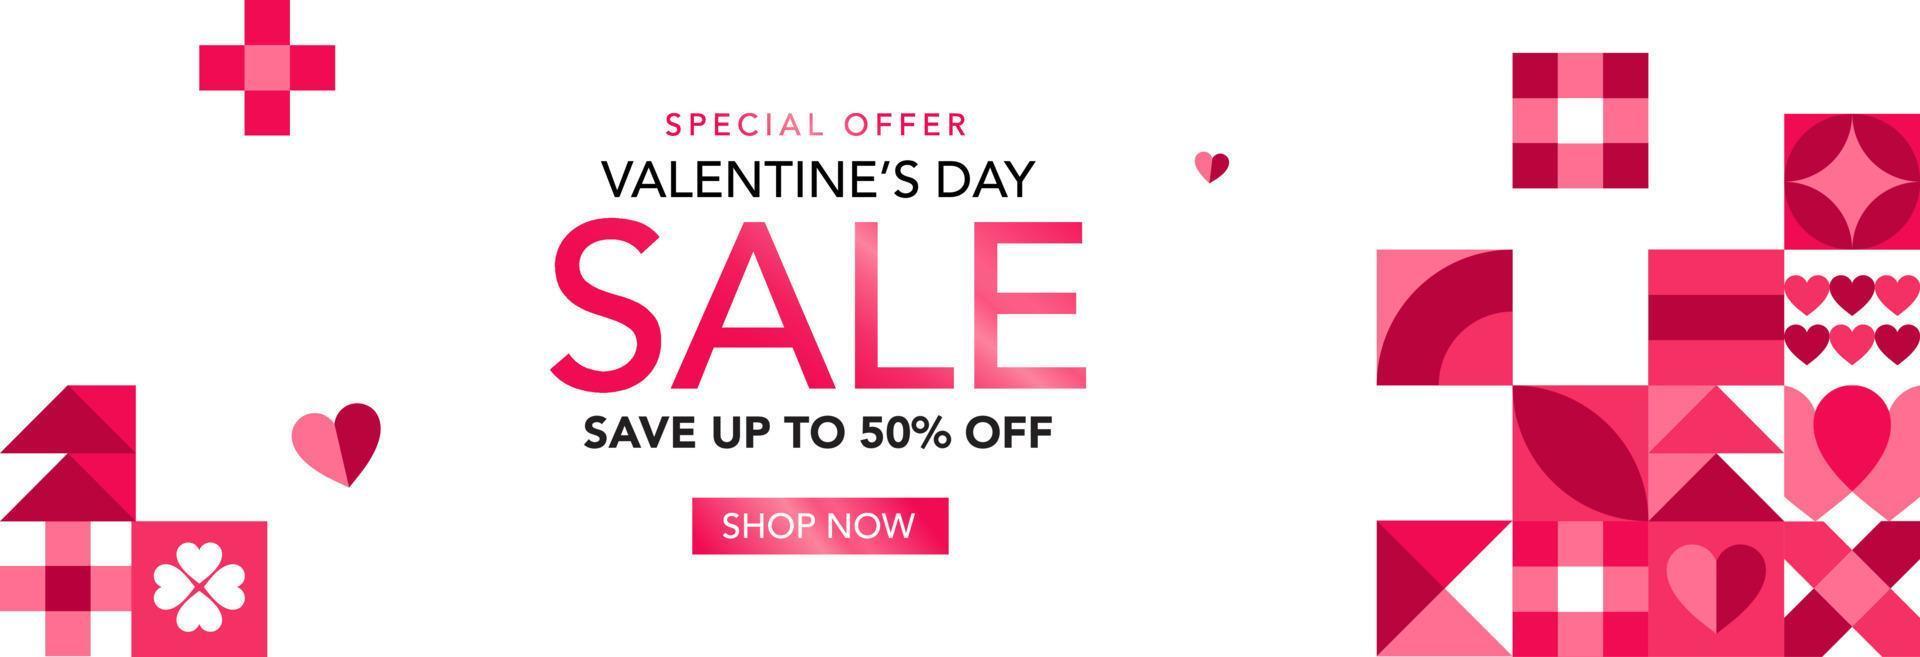 Geometric style valentines day sale template vector